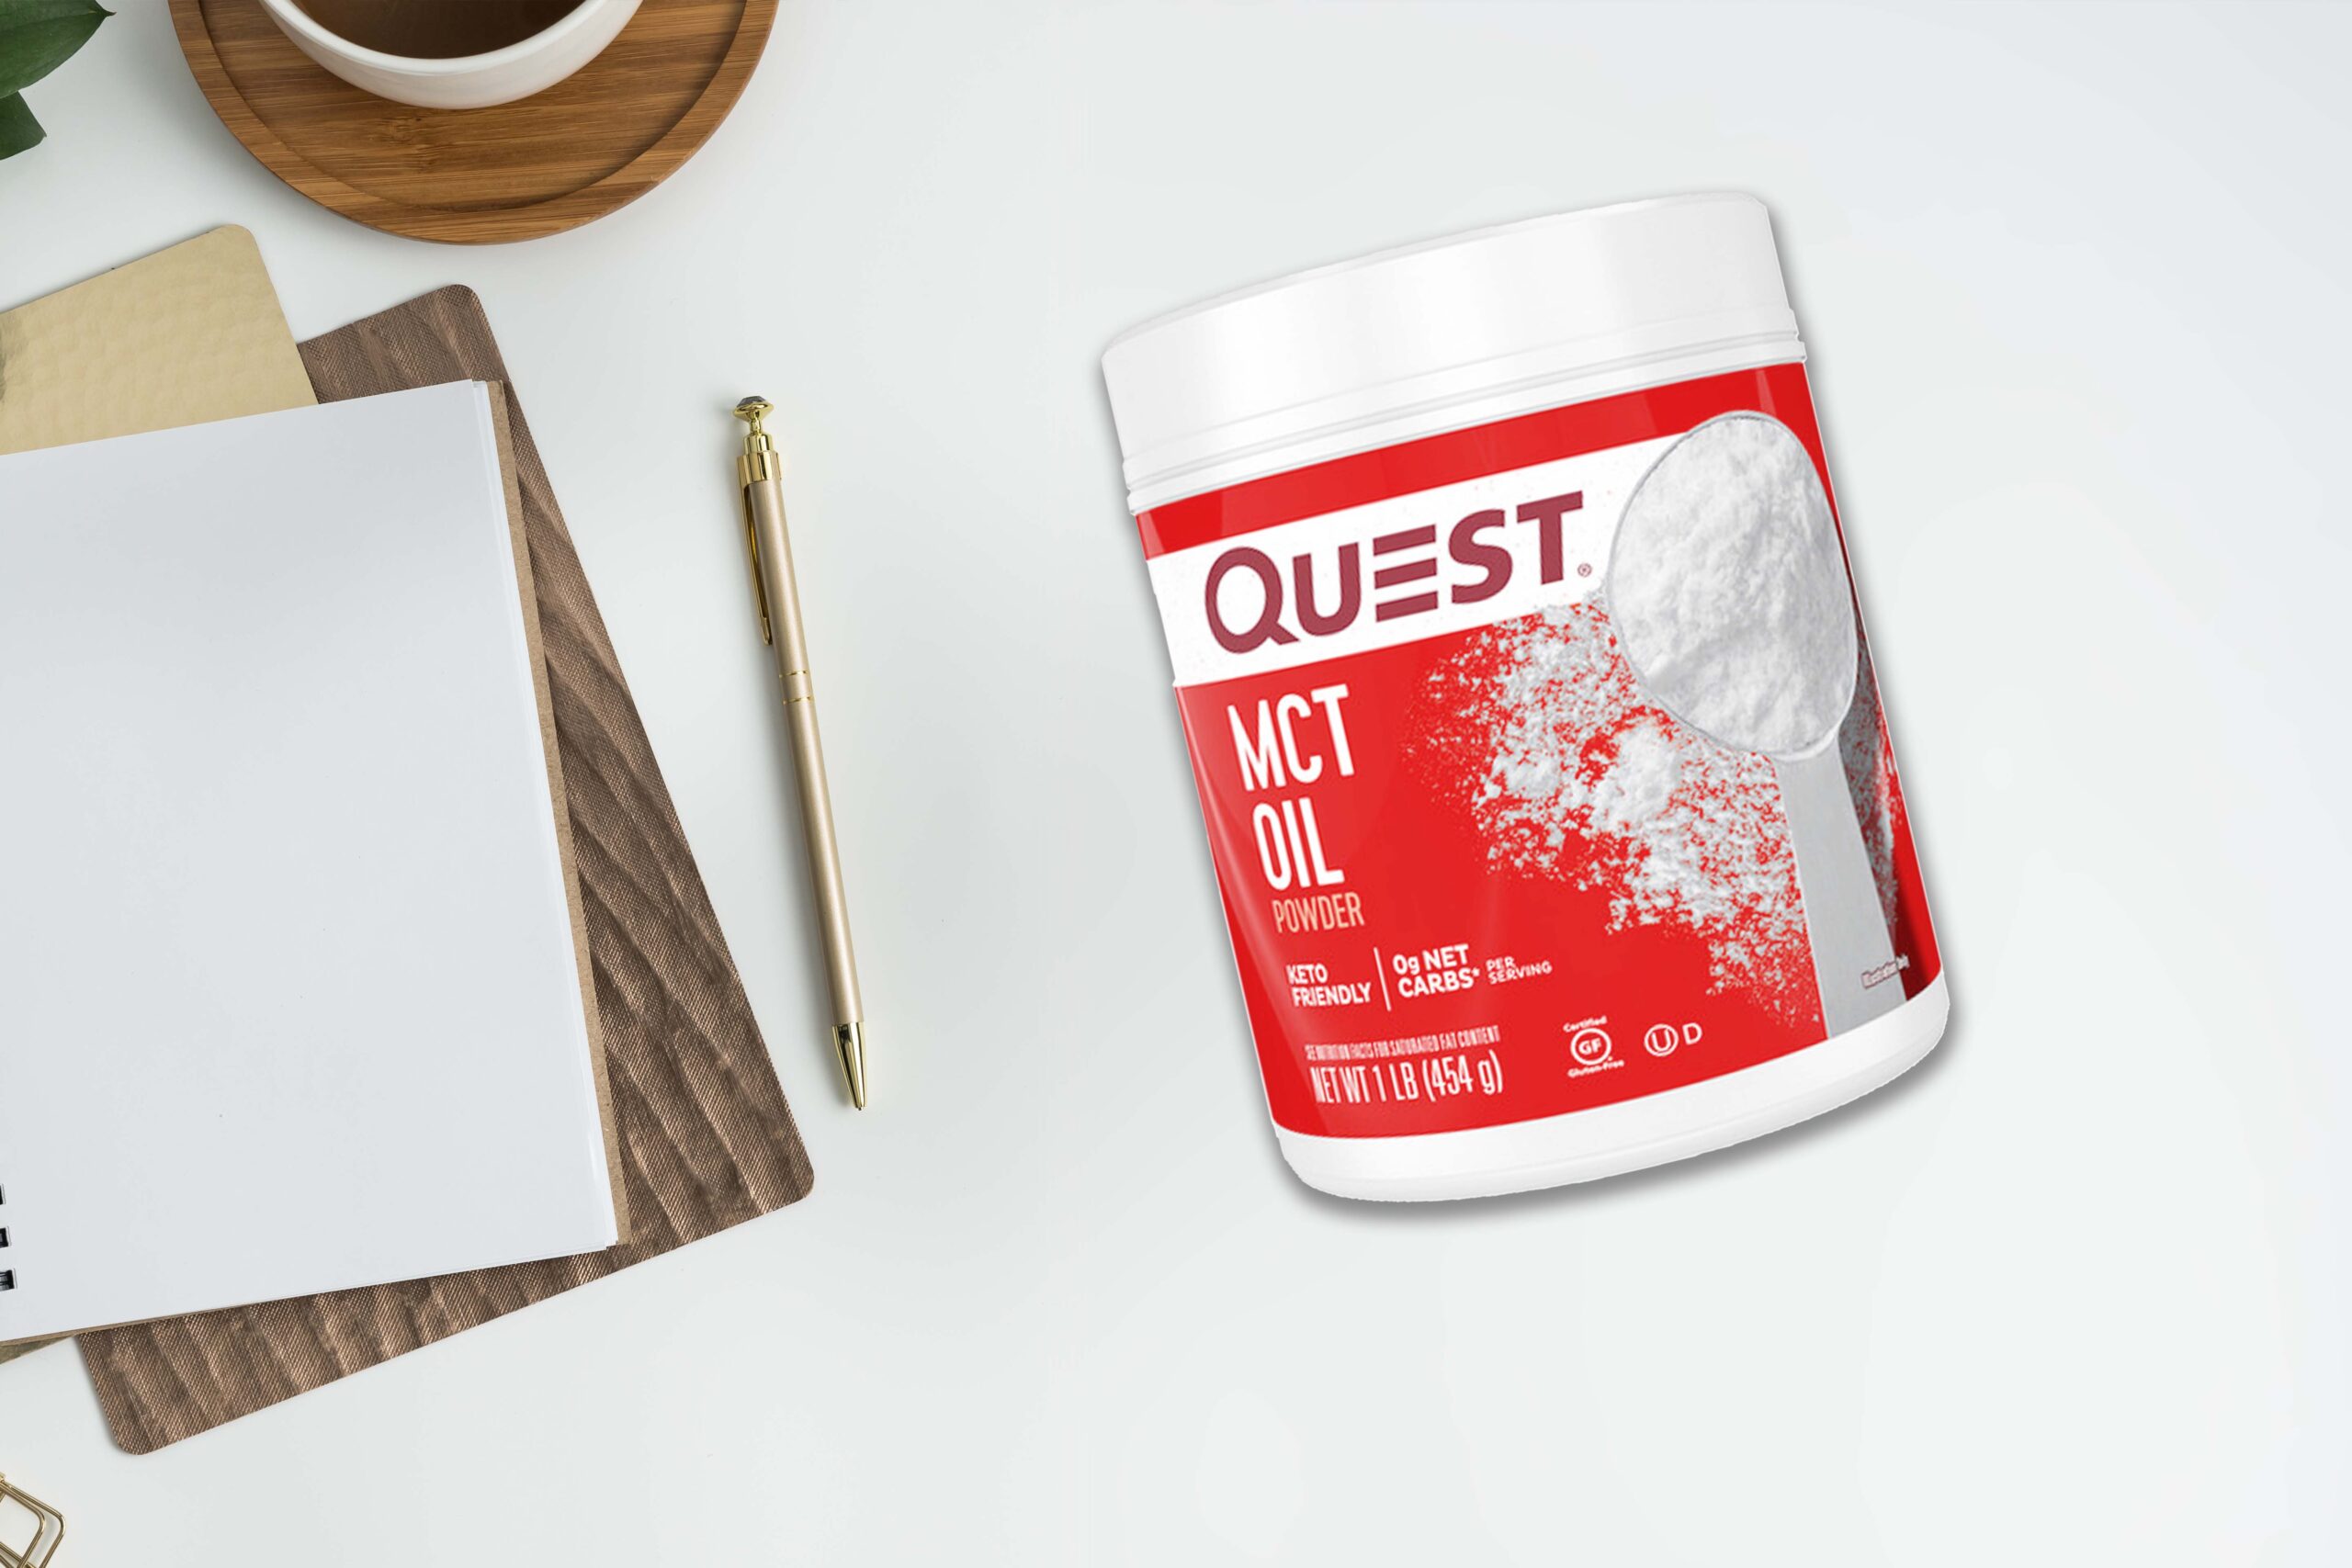 Quest Mct Oil